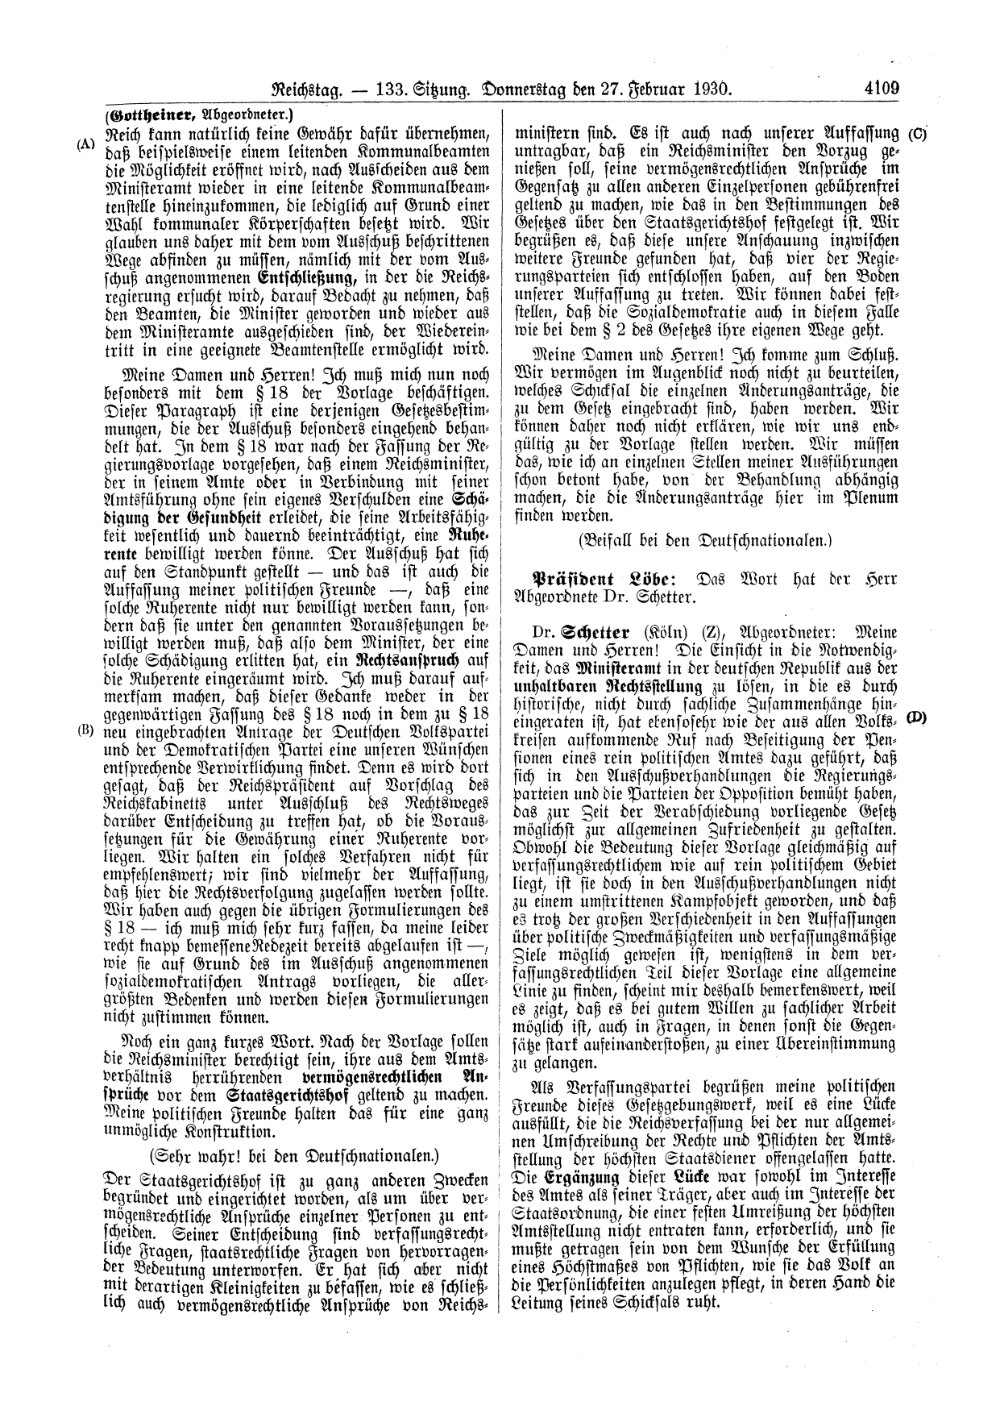 Scan of page 4109